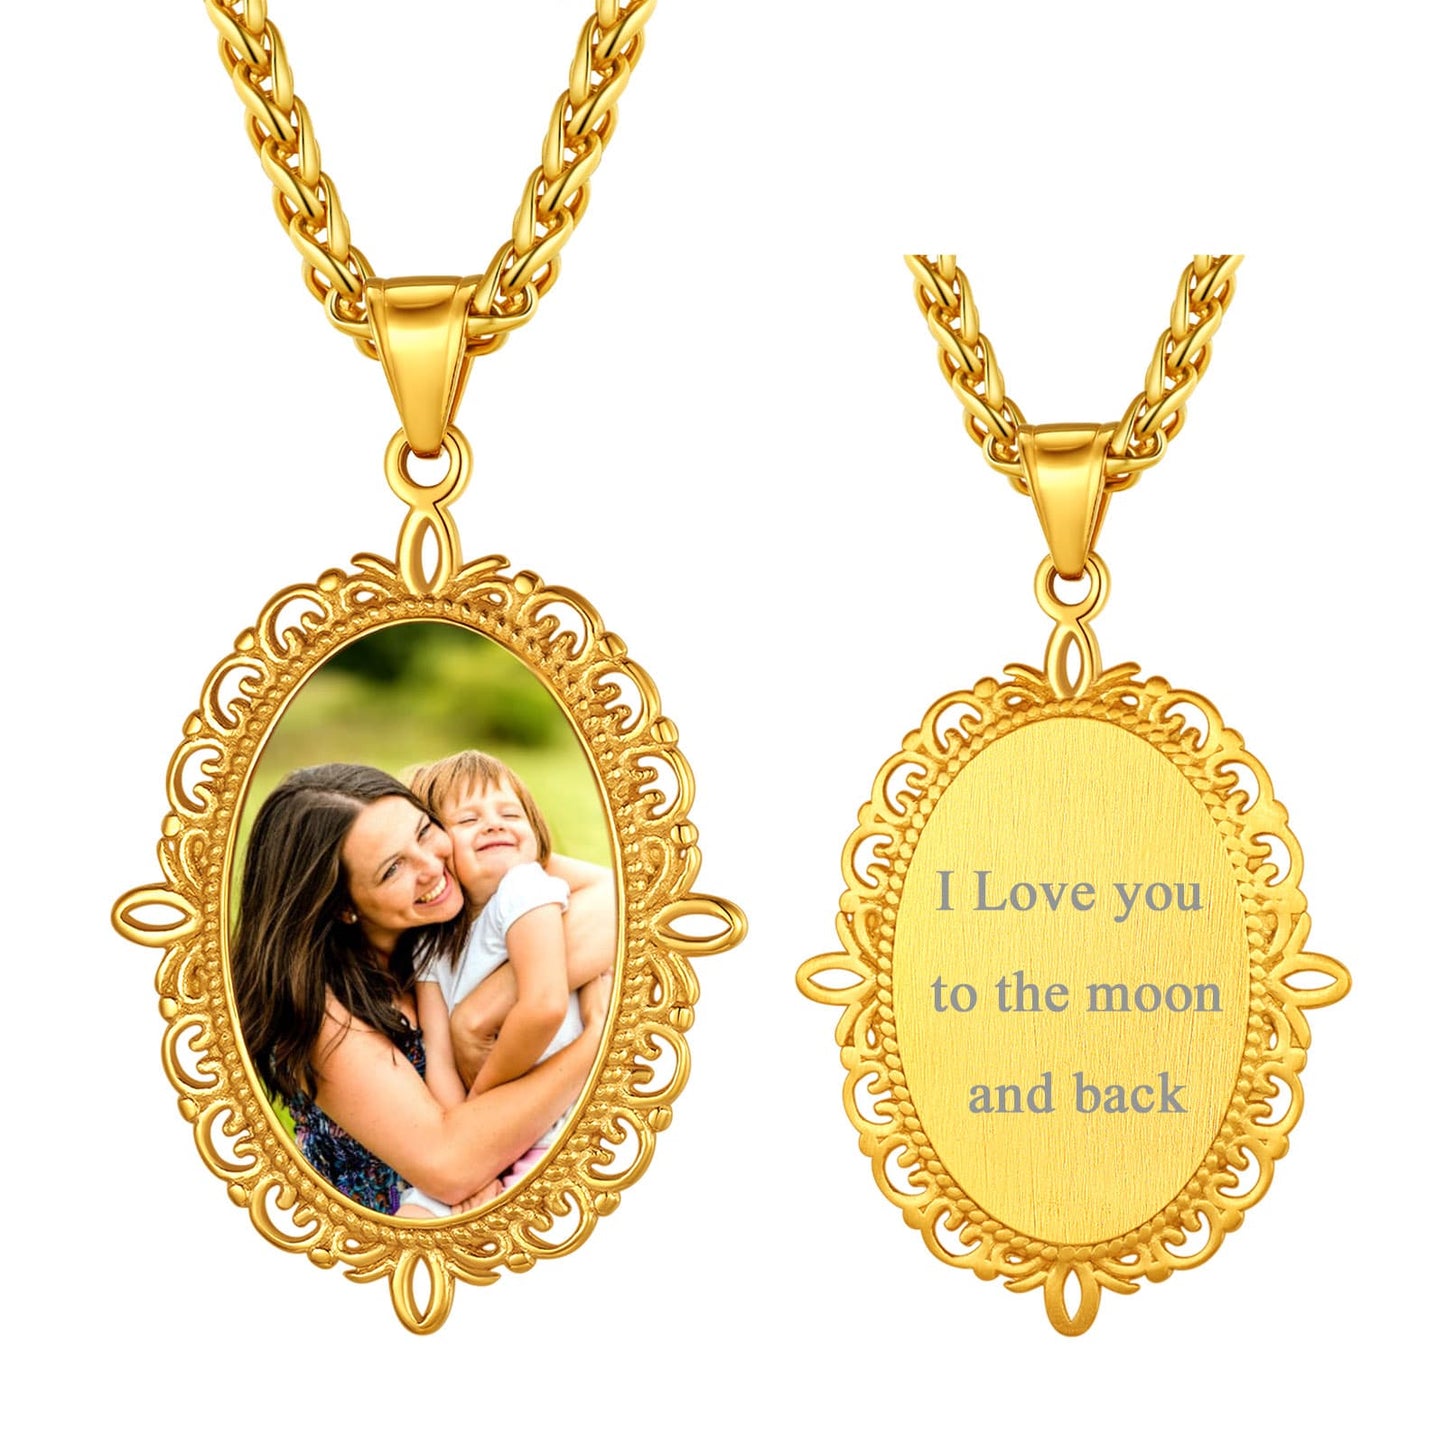 Birthstonesjewelry Personalized Oval Picture Necklace with Message Gold Plated